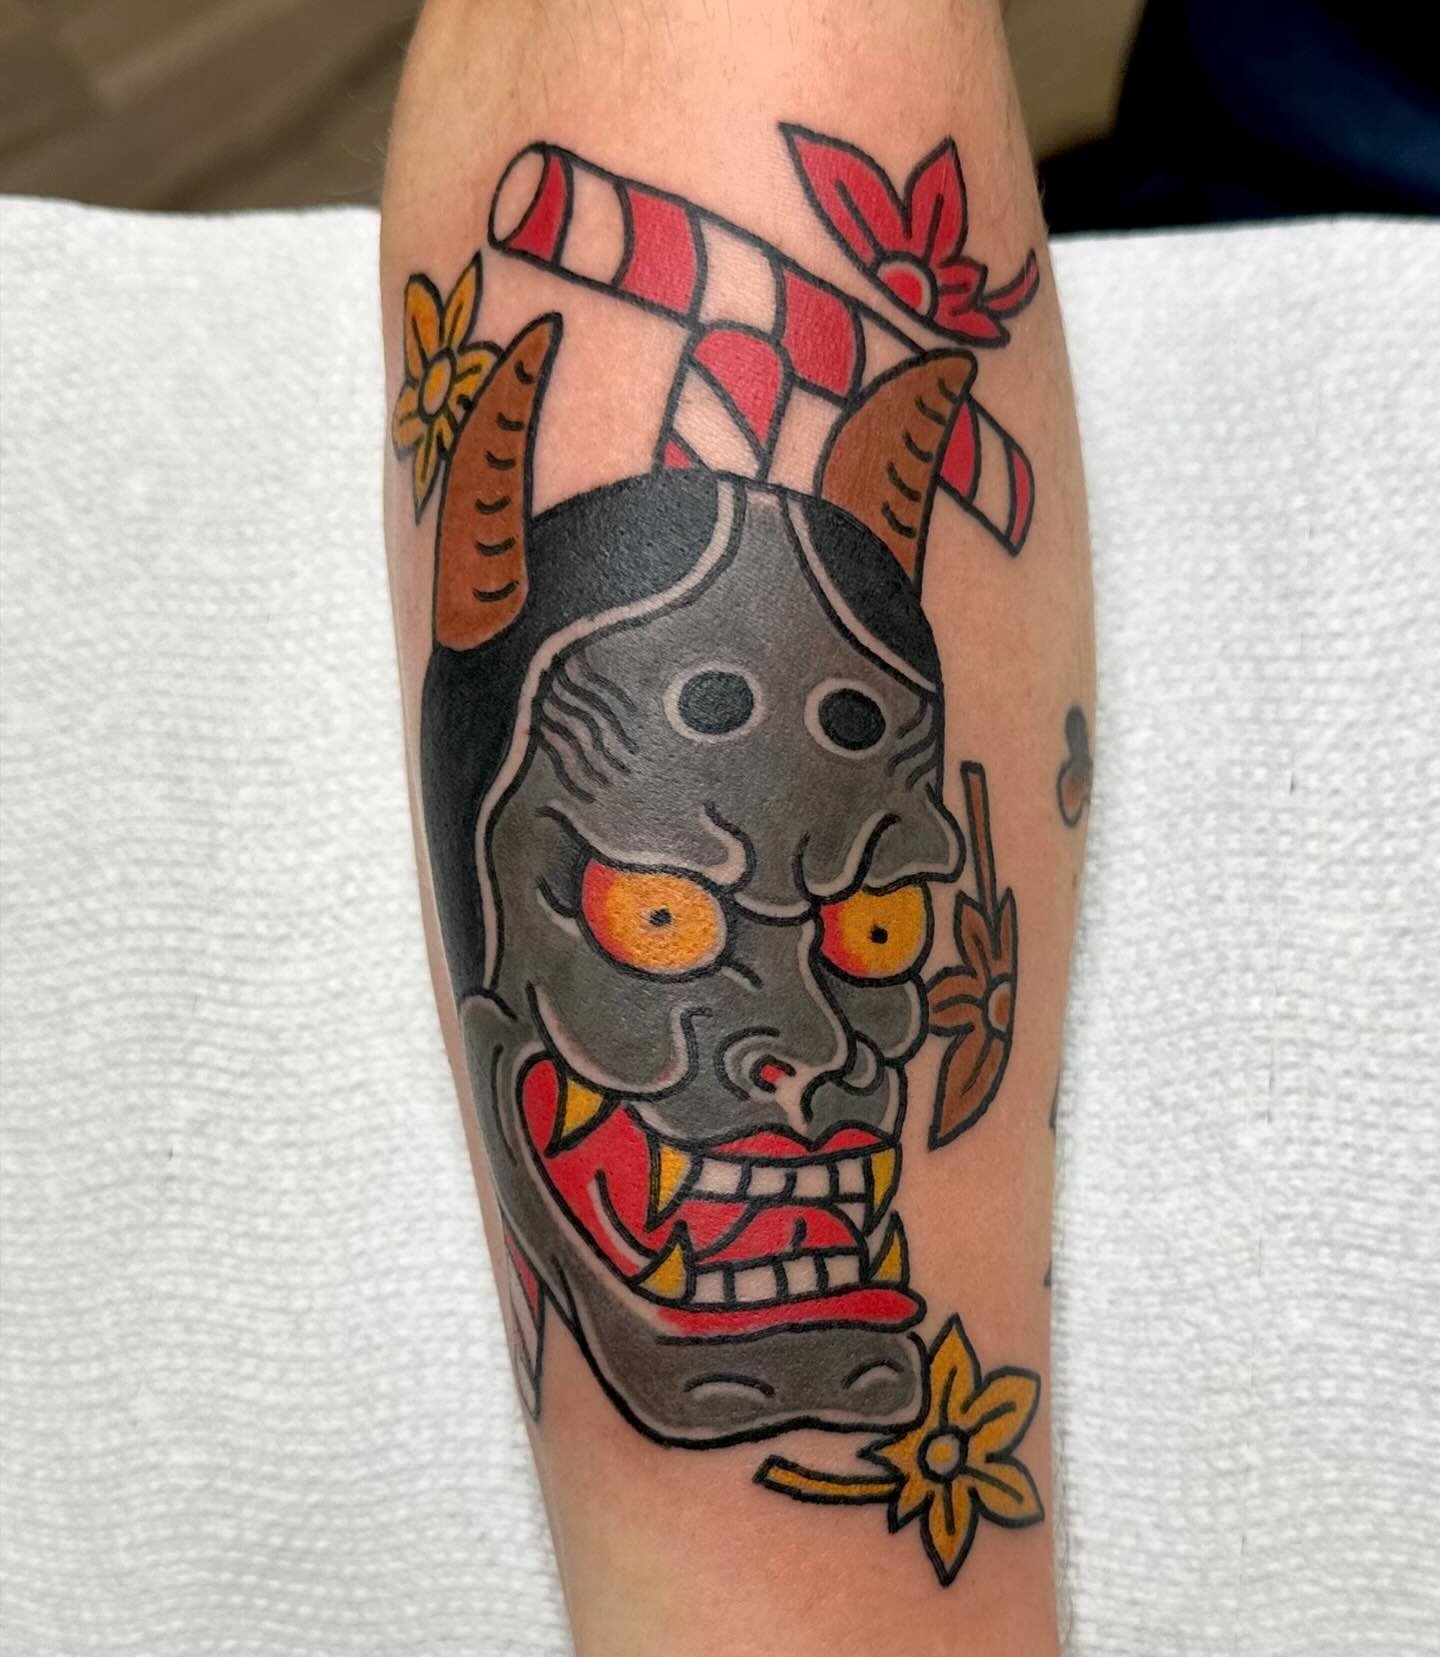 Sick traditional Hannya mask by @shanemccormicktattoos